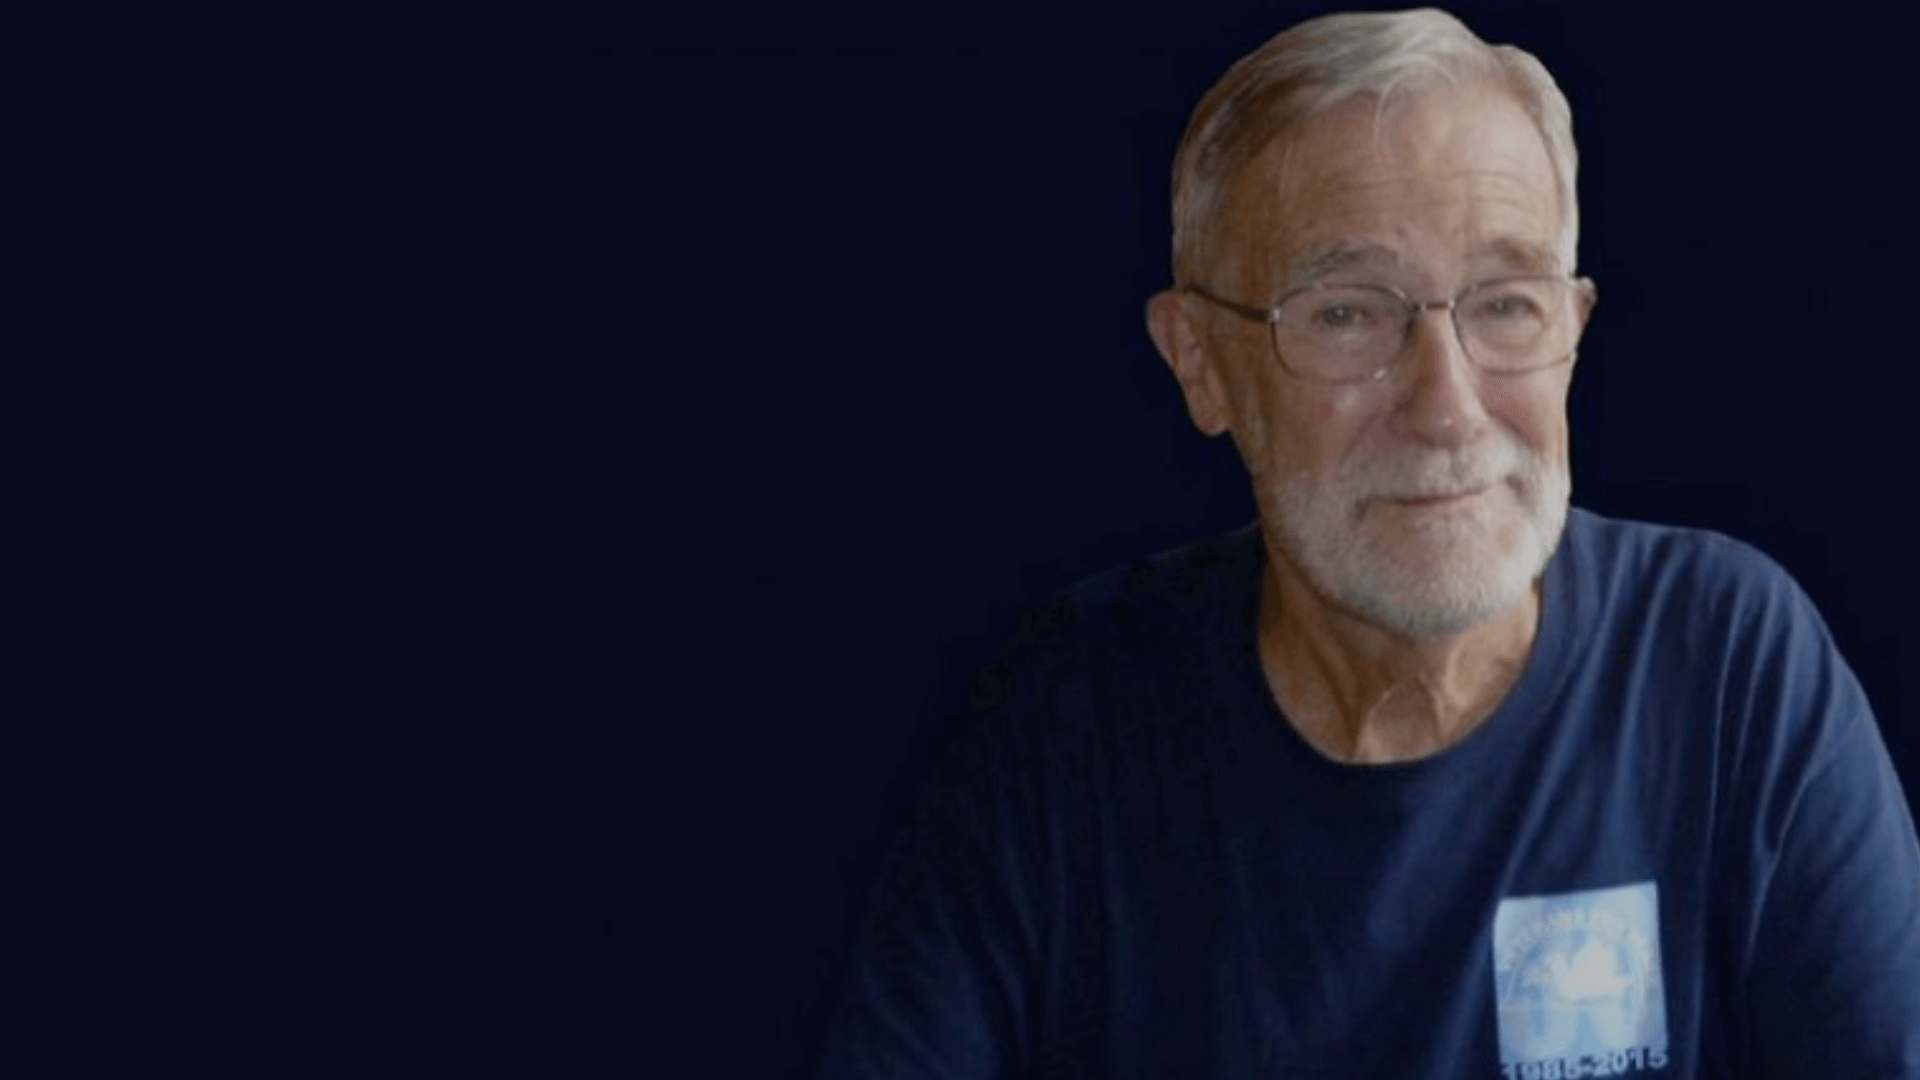 Messing with the Truth: Disinformation in the West Spread by Ray McGovern